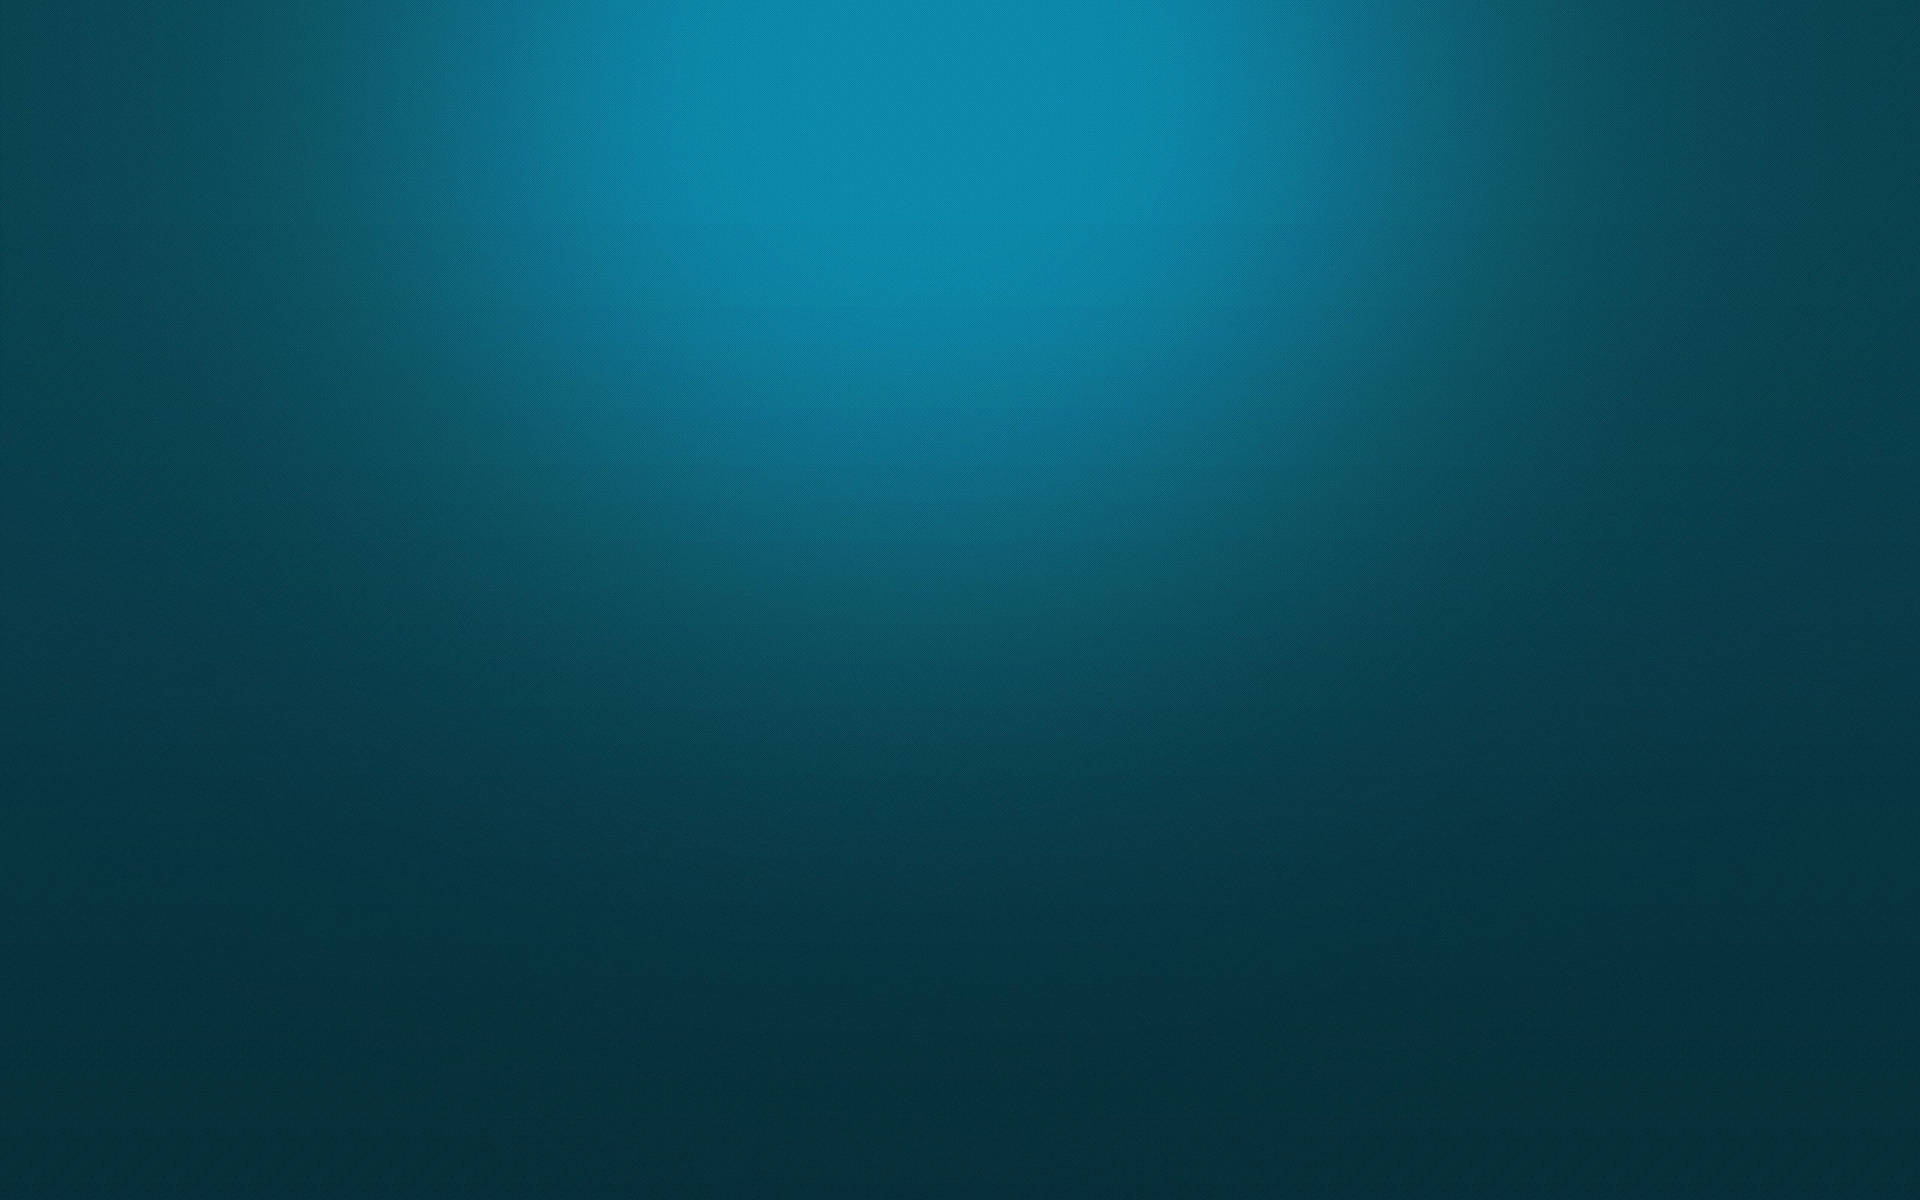 100+] Pastel Blue Solid Wallpapers | Wallpapers.com